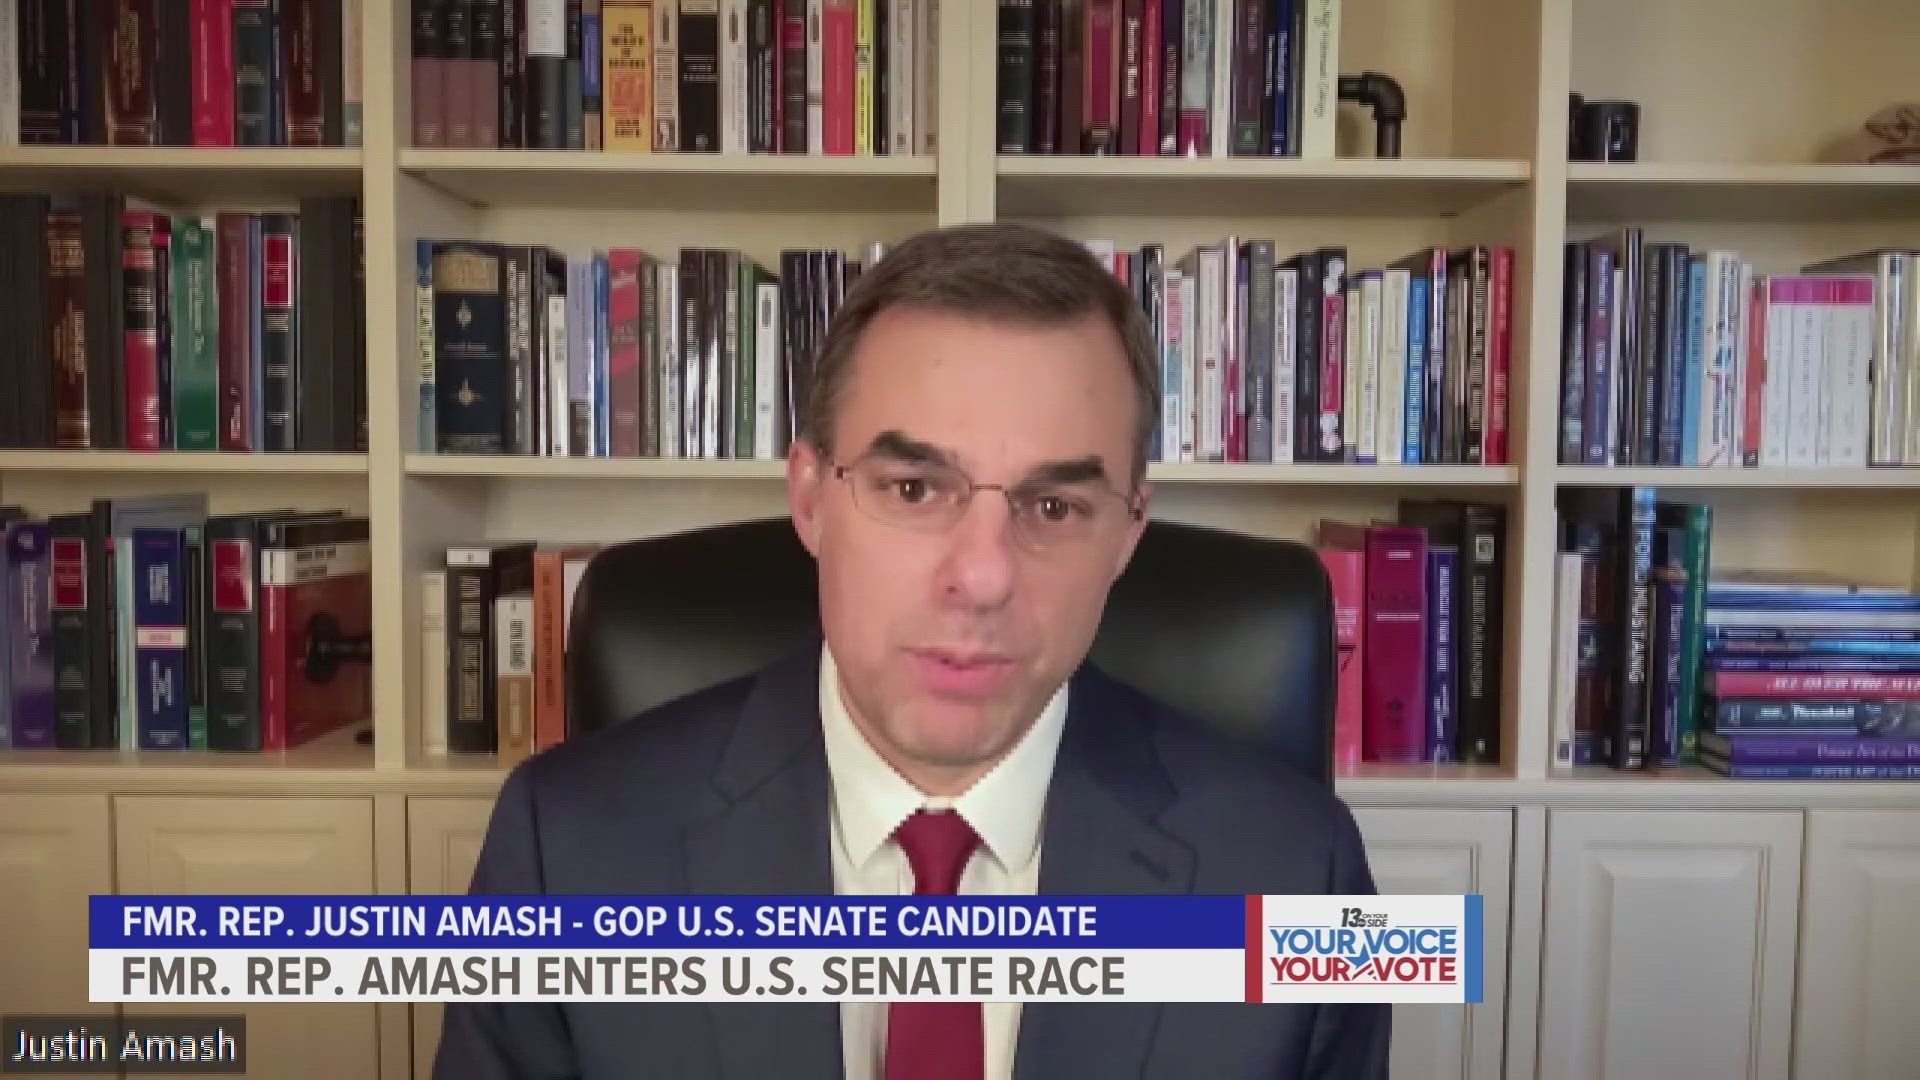 Justin Amash, who lists his party affiliation on X as Libertarian, announced he will be running in the Republican primary for Michigan's open U.S. Senate seat.